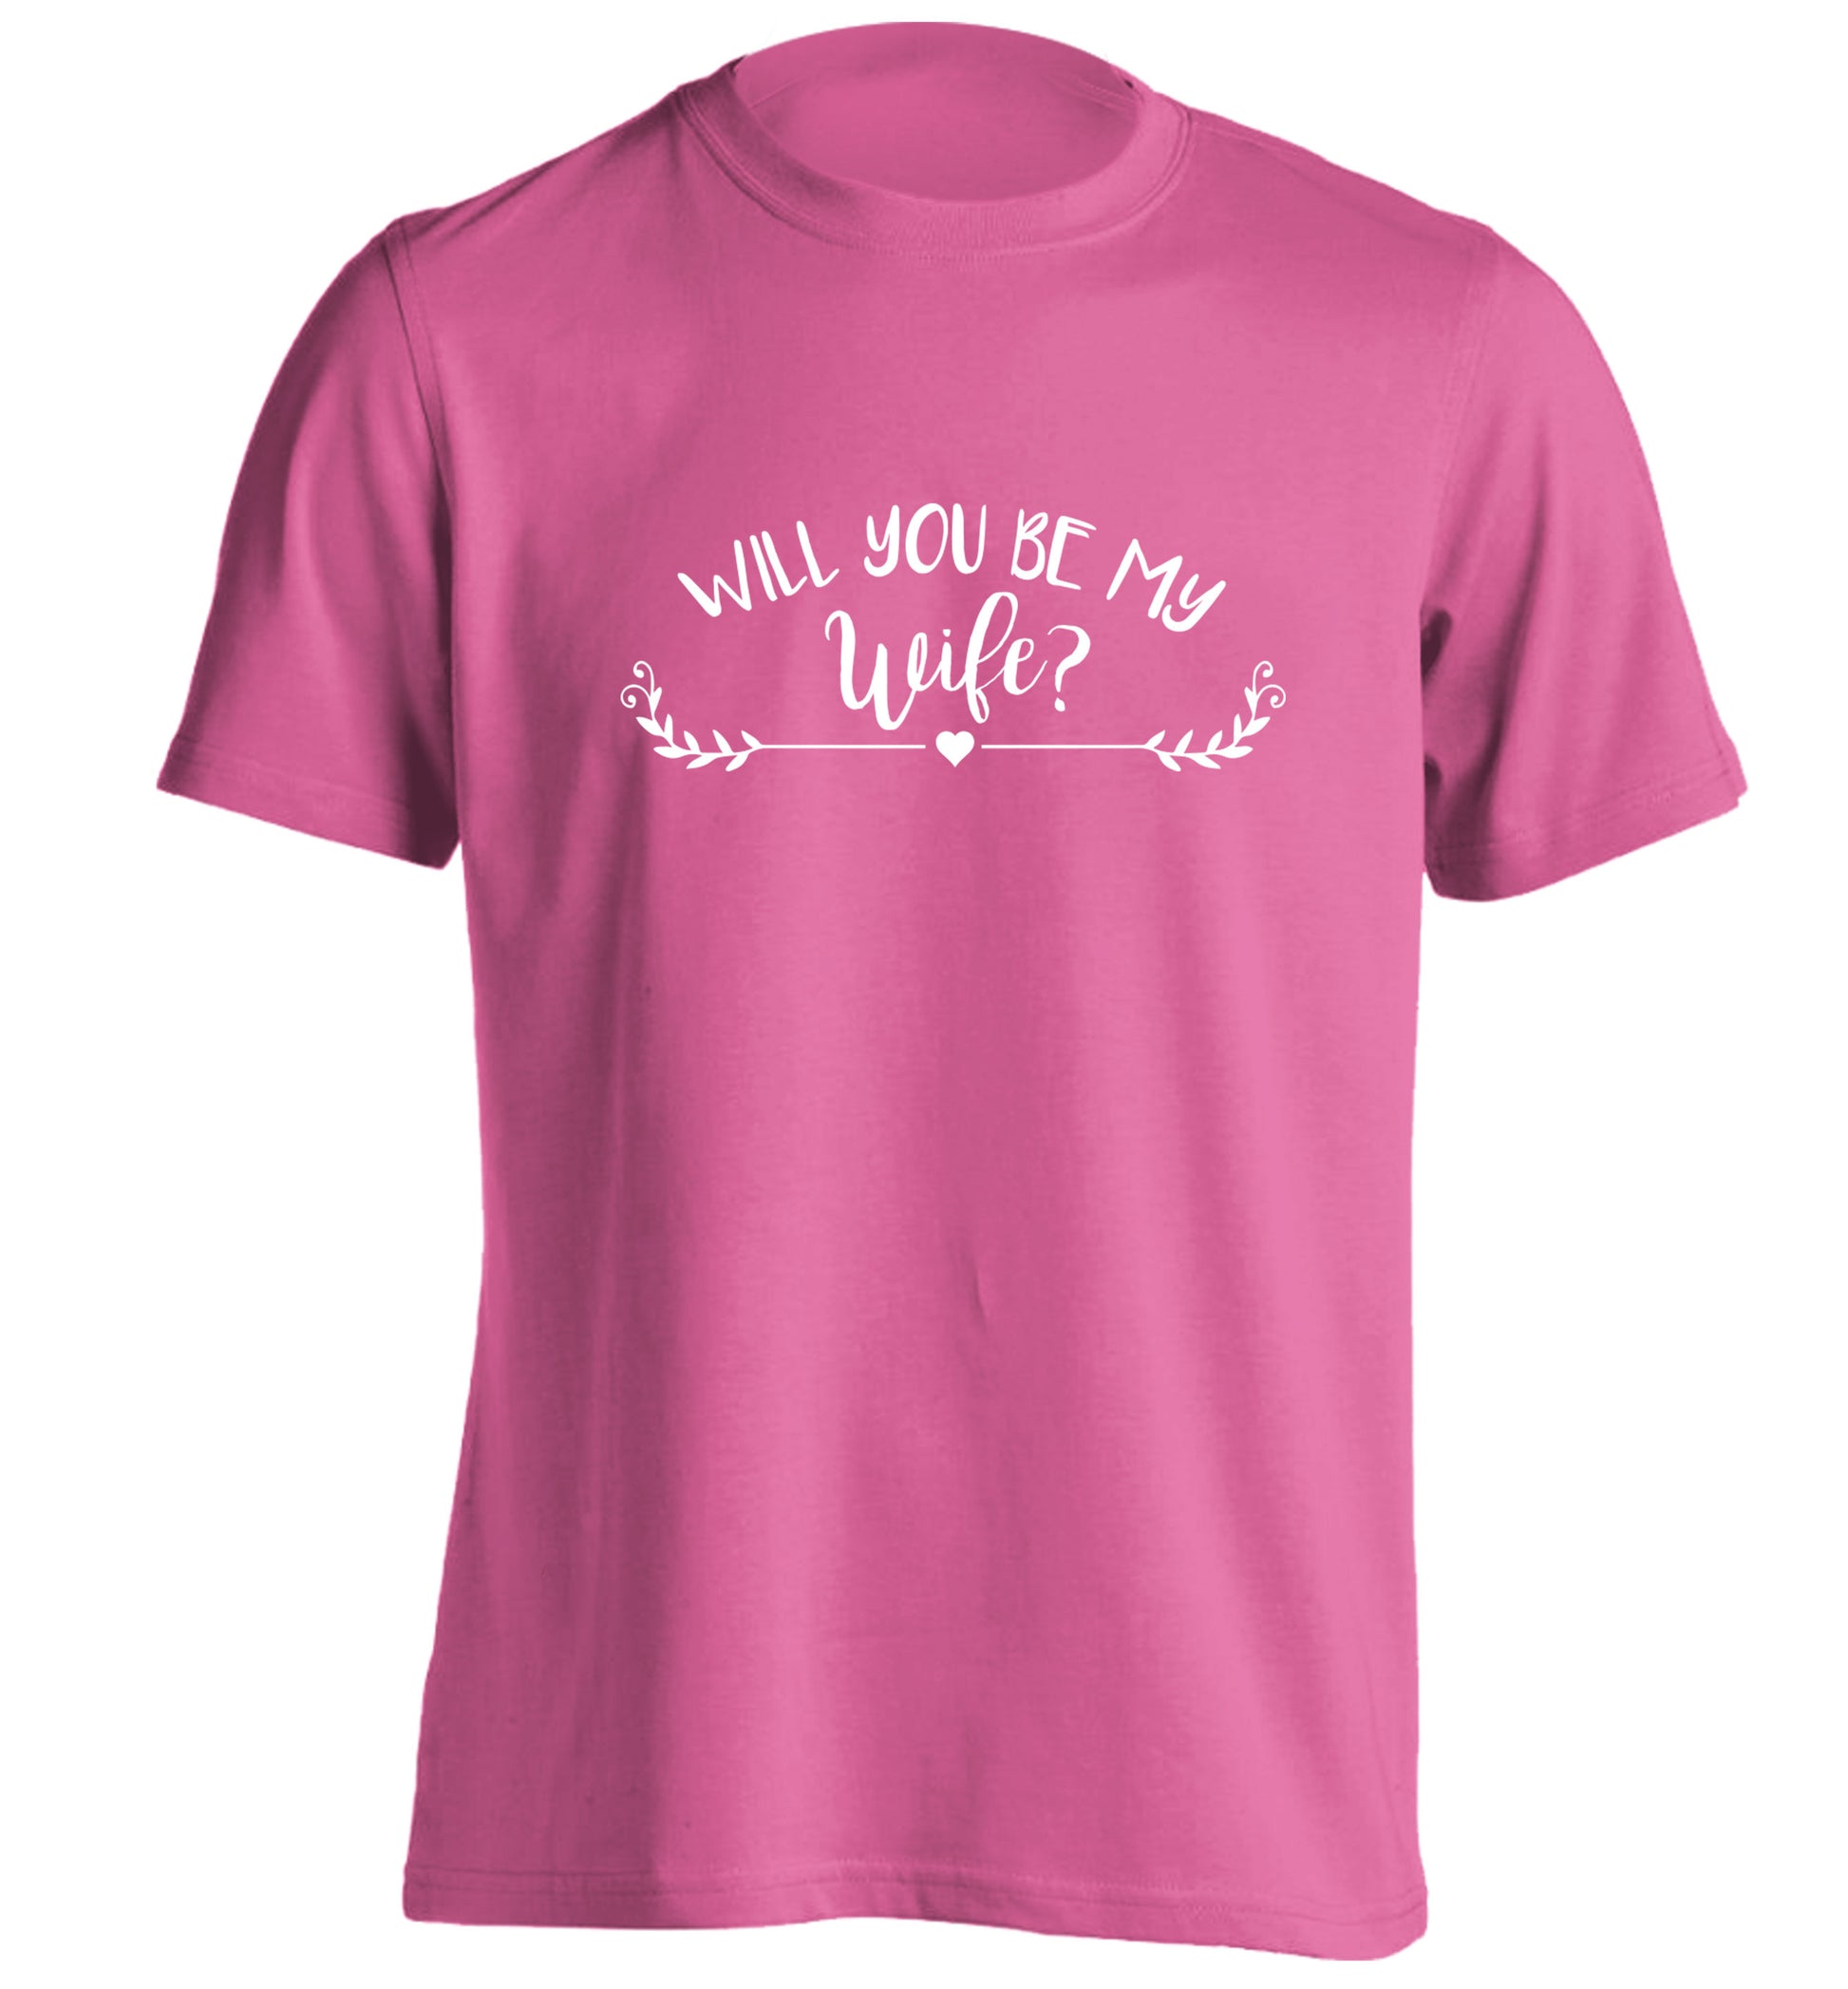 Will you be my wife? adults unisex pink Tshirt 2XL